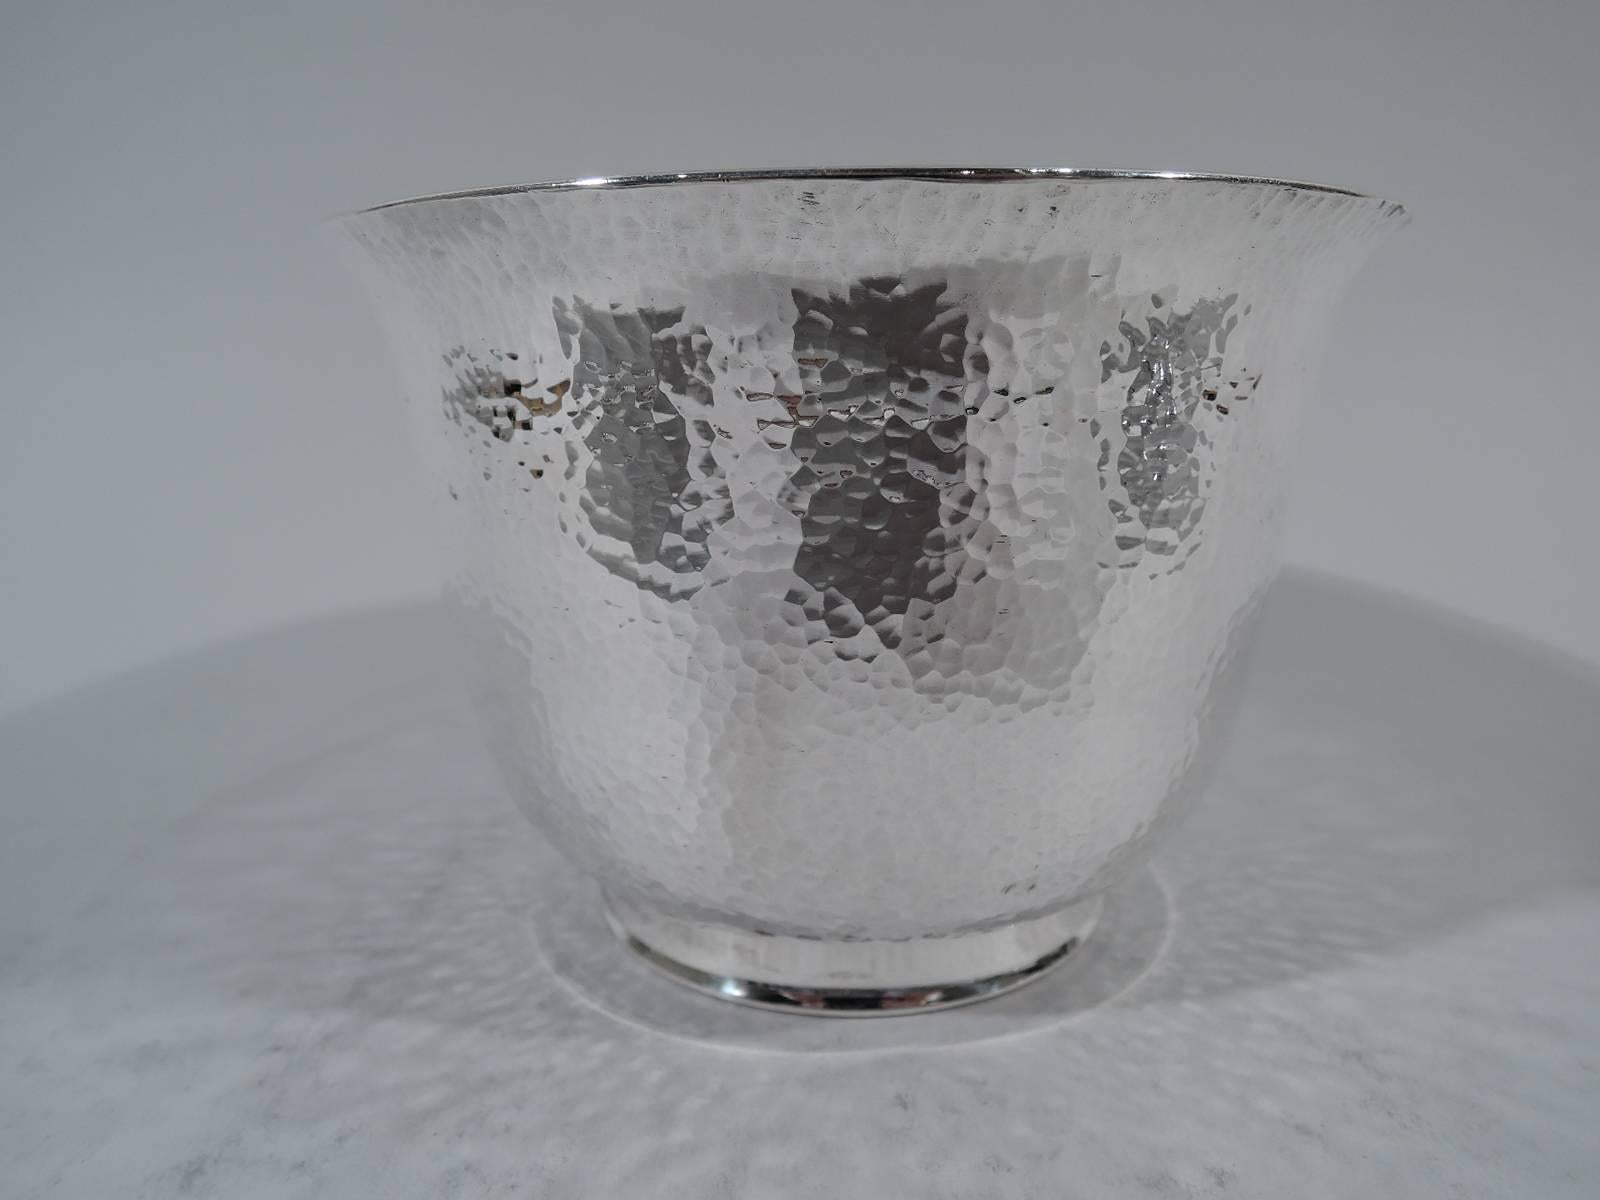 Set of 3 Japanese hand-hammered silver bowls. Each: Flared rim and curved bottom. Shimmering honeycomb pattern. Short plain foot. Hallmarked. Total weight: 34 troy ounces.